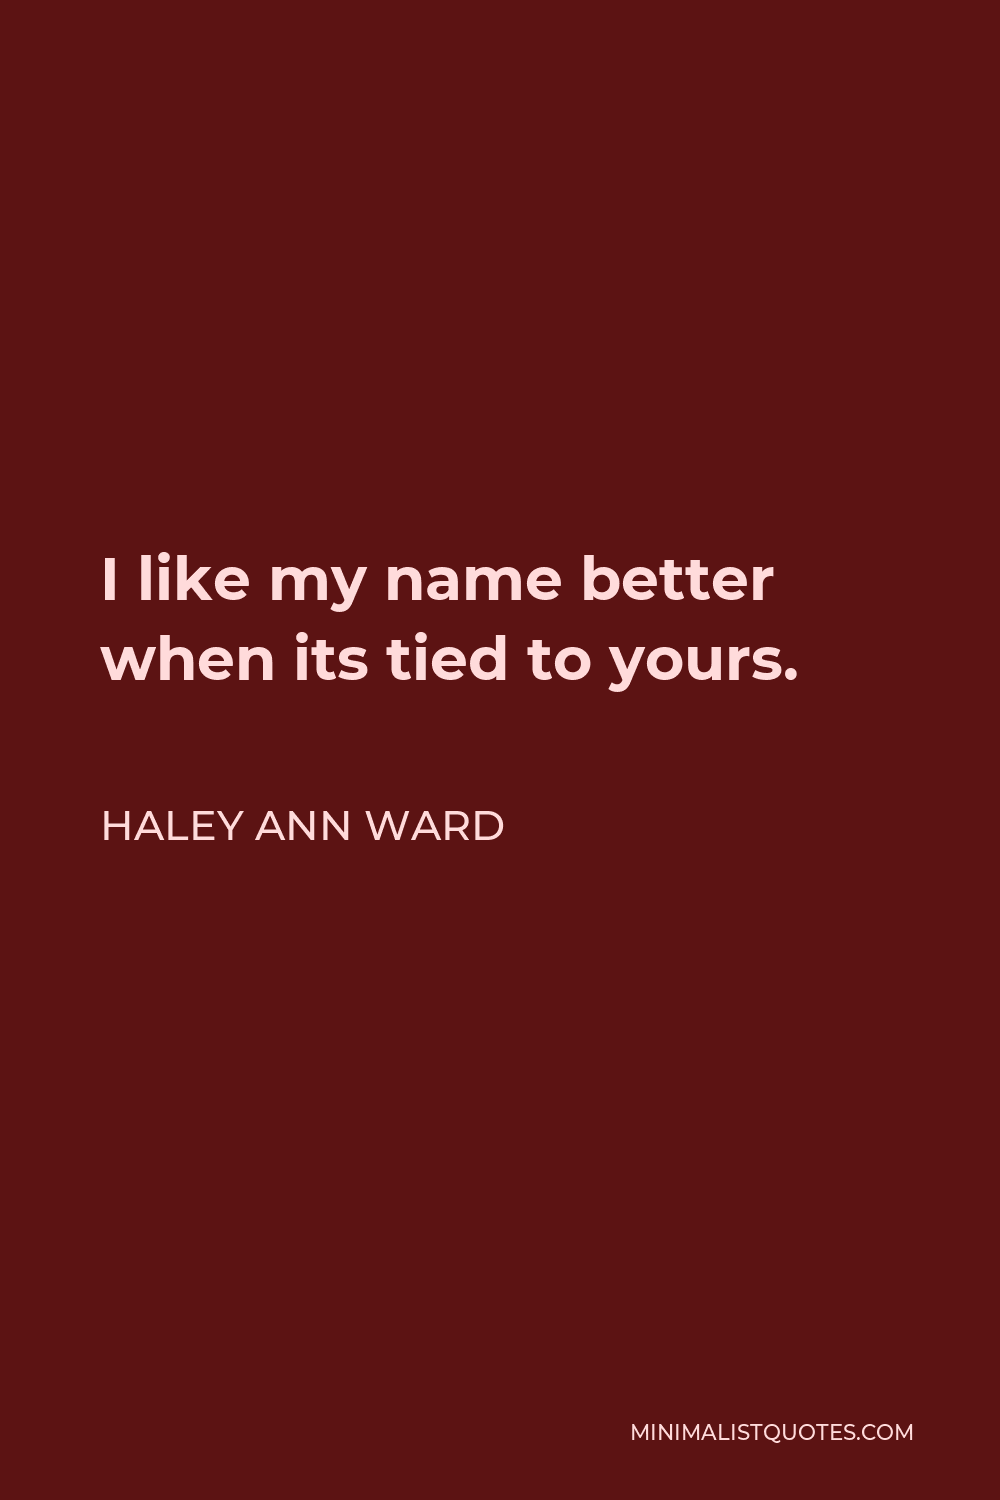 Haley Ann Ward Quote - I like my name better when its tied to yours.